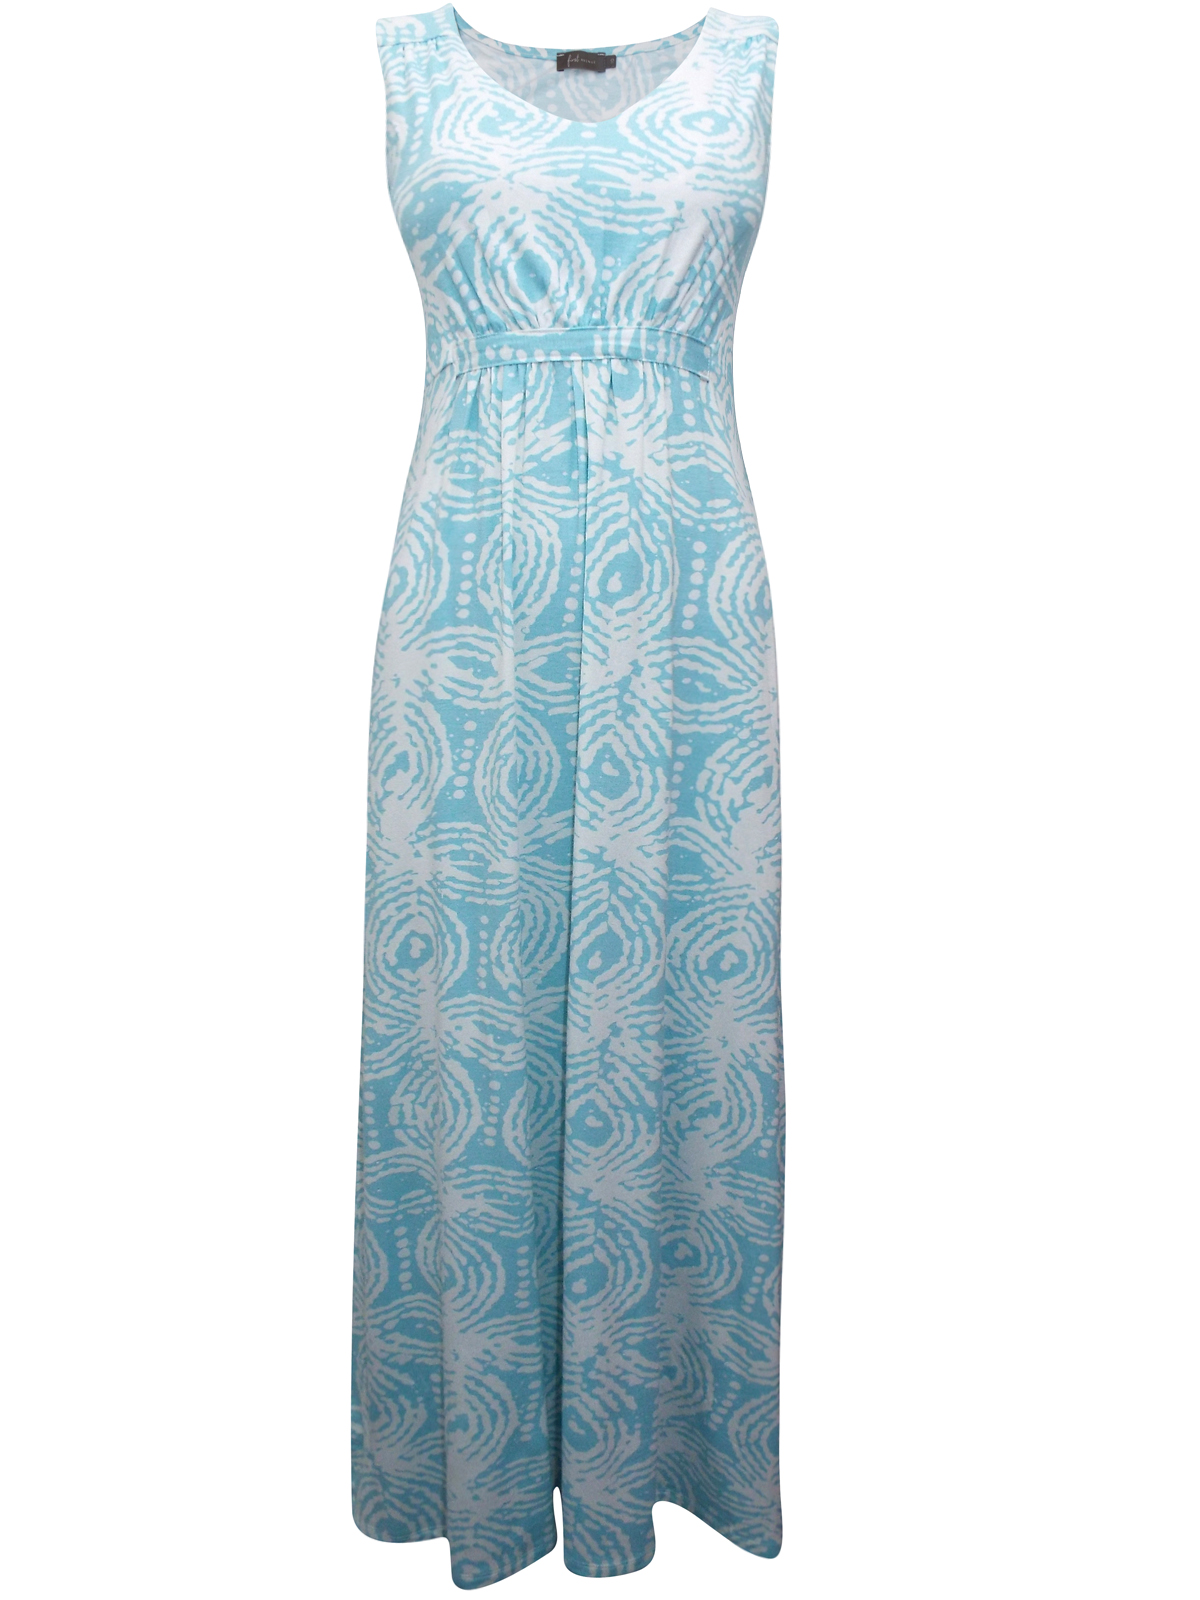 First Avenue MINT Sleeveless Floral Maxi Dress - Size 10 to 20